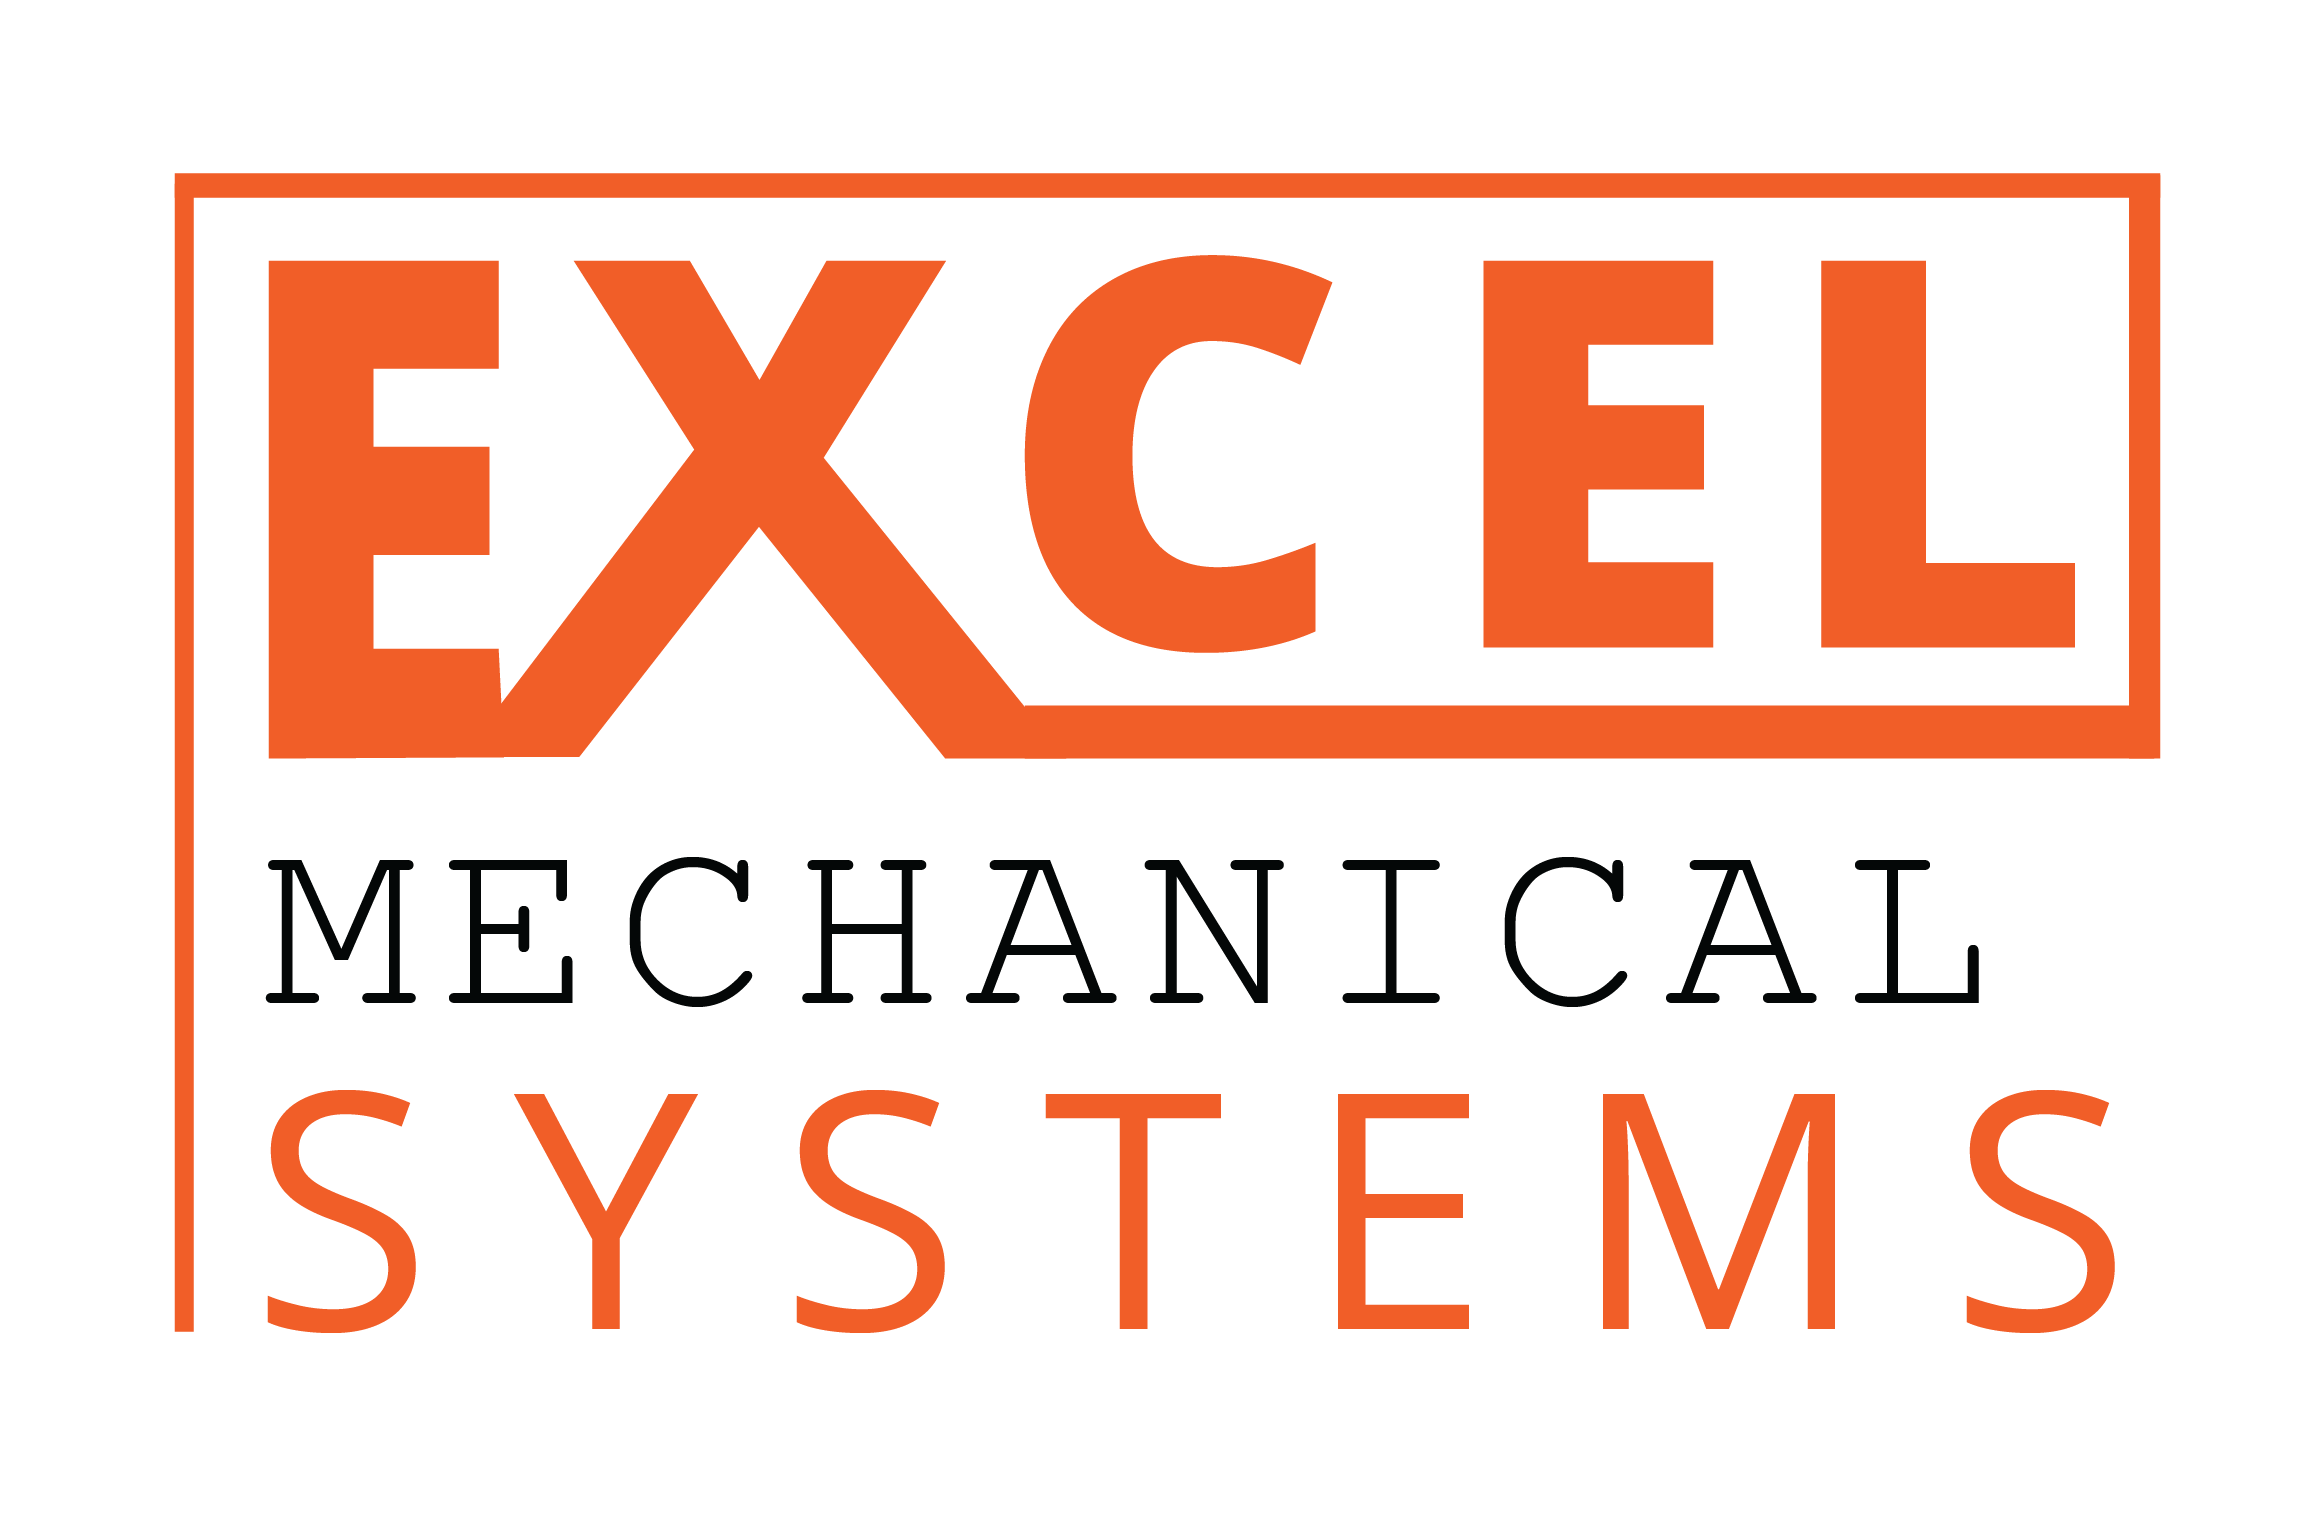 Excel Mechanical Systems